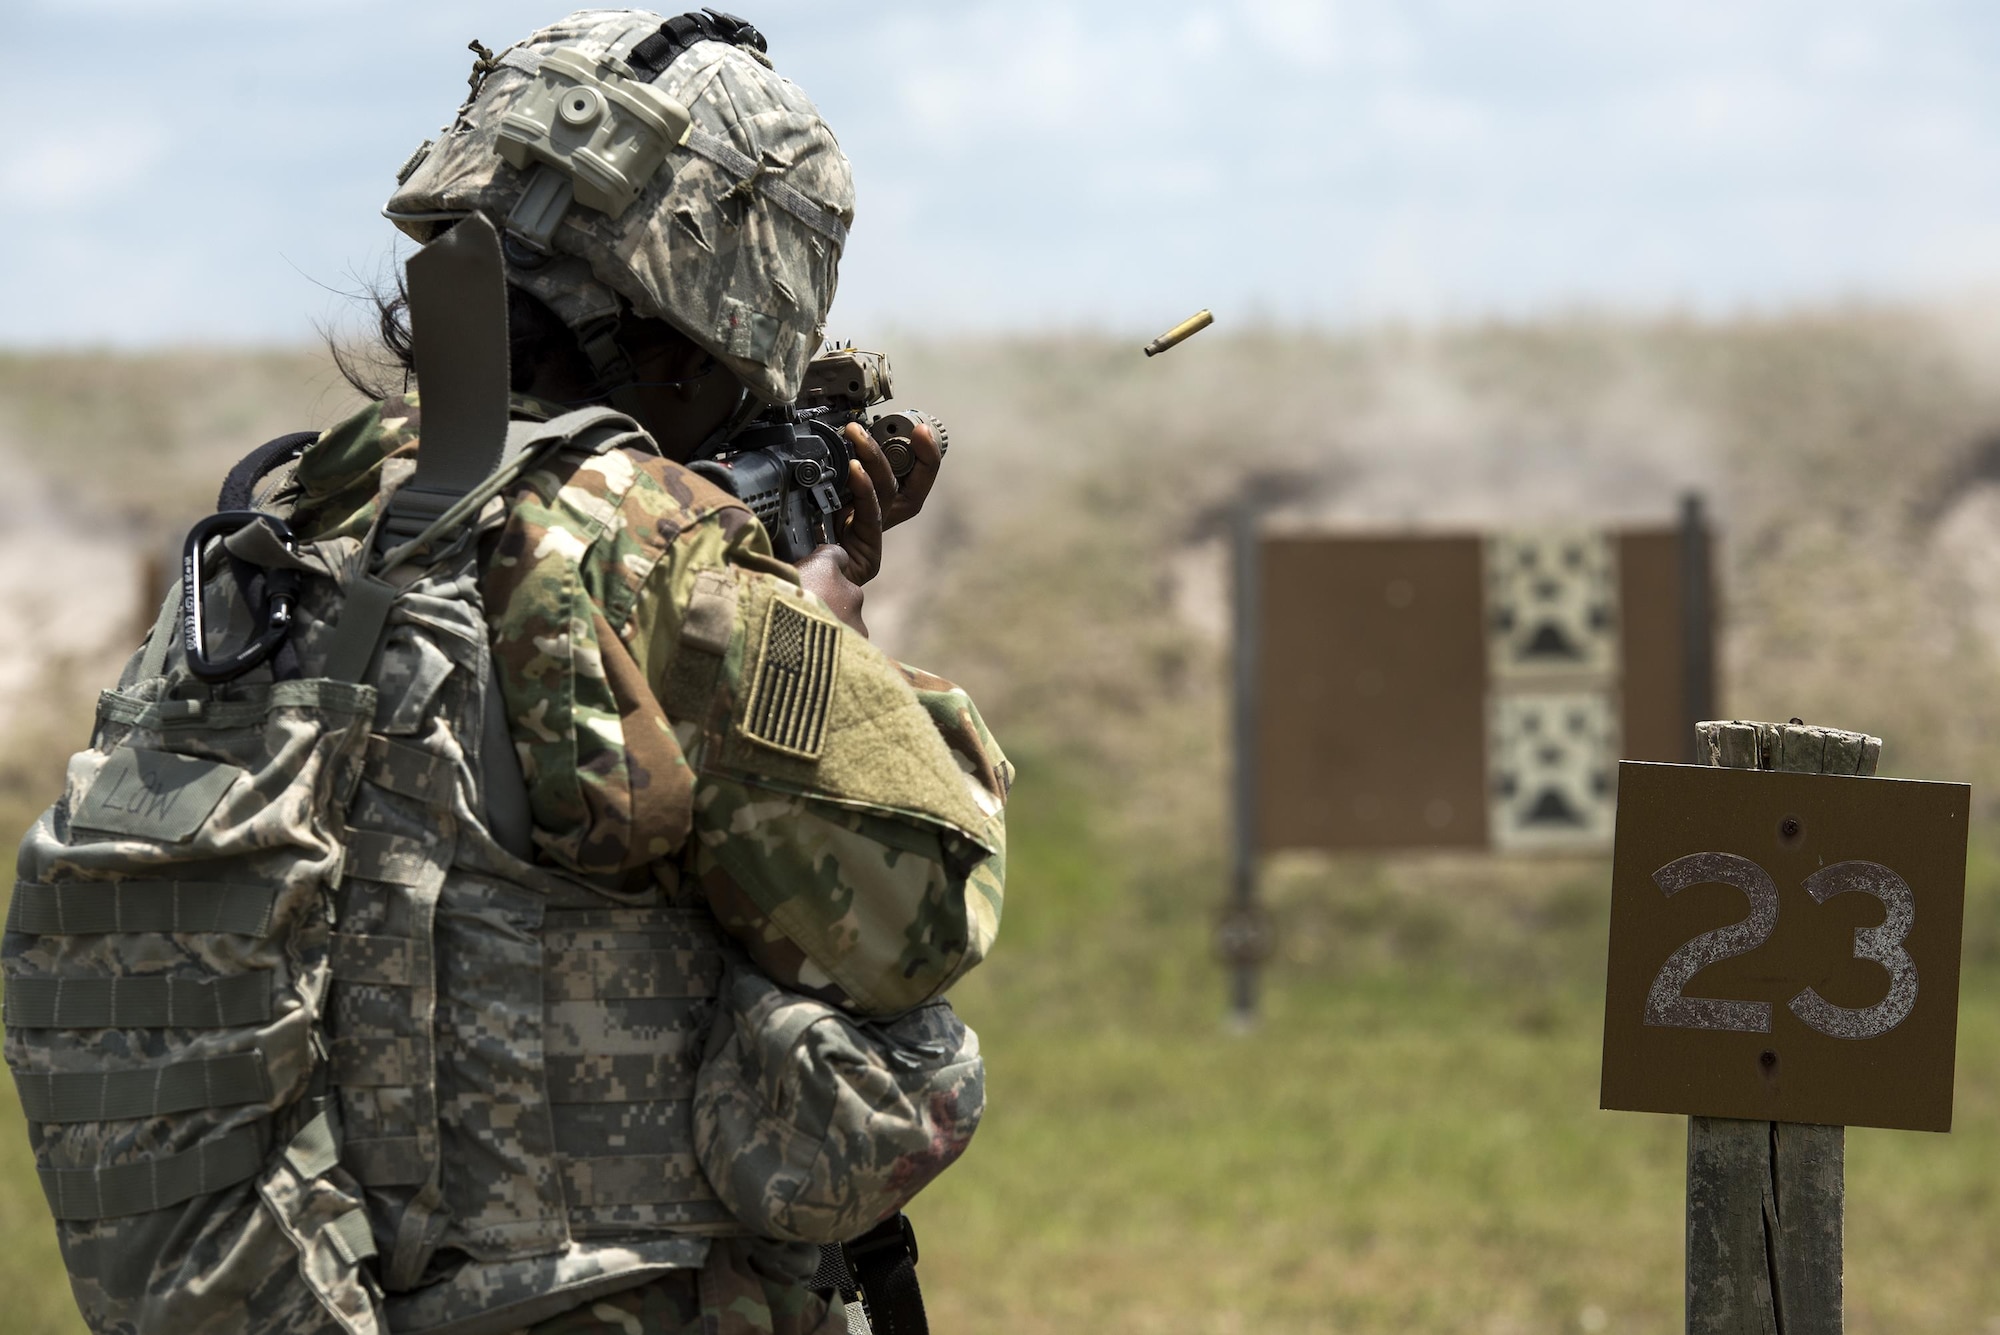 U.S. Air Force Senior Airman Niya Law, 823d Base Defense Squadron fireteam member, fires an M4 carbine April 13, 2016, at Avon Park Air Force Range, Fla. During Spartan Warrior week Airmen assigned to various squadrons across the U.S. competed against one another for medals, bragging rights and a trophy. (U.S. Air Force photo by Airman 1st Class Janiqua P. Robinson/Released)